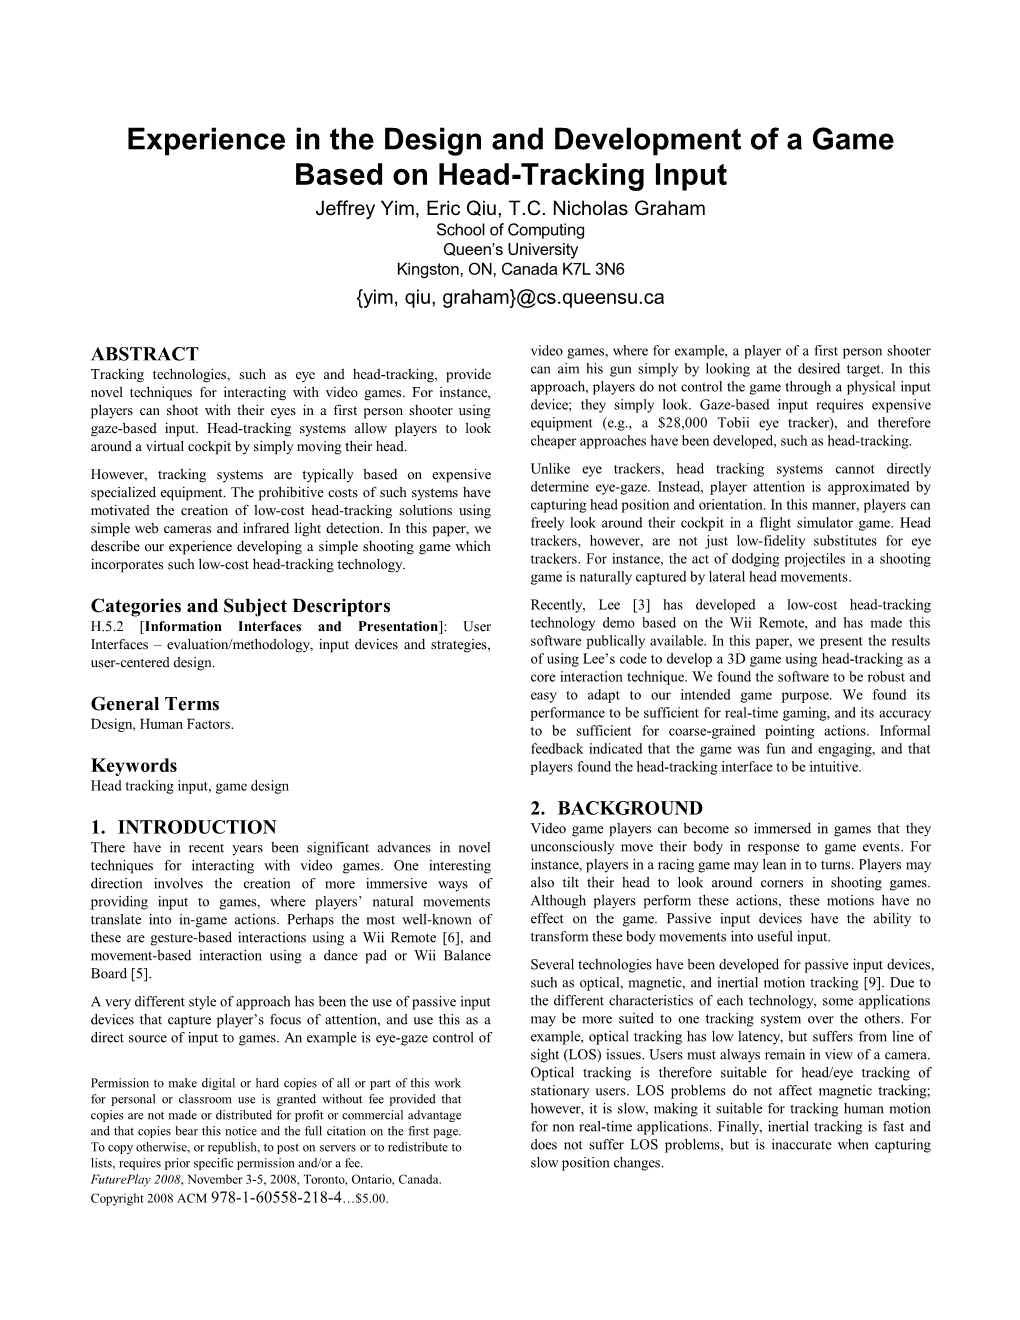 Experience in the Design and Development of a Game Based on Head-Tracking Input Jeffrey Yim, Eric Qiu, T.C